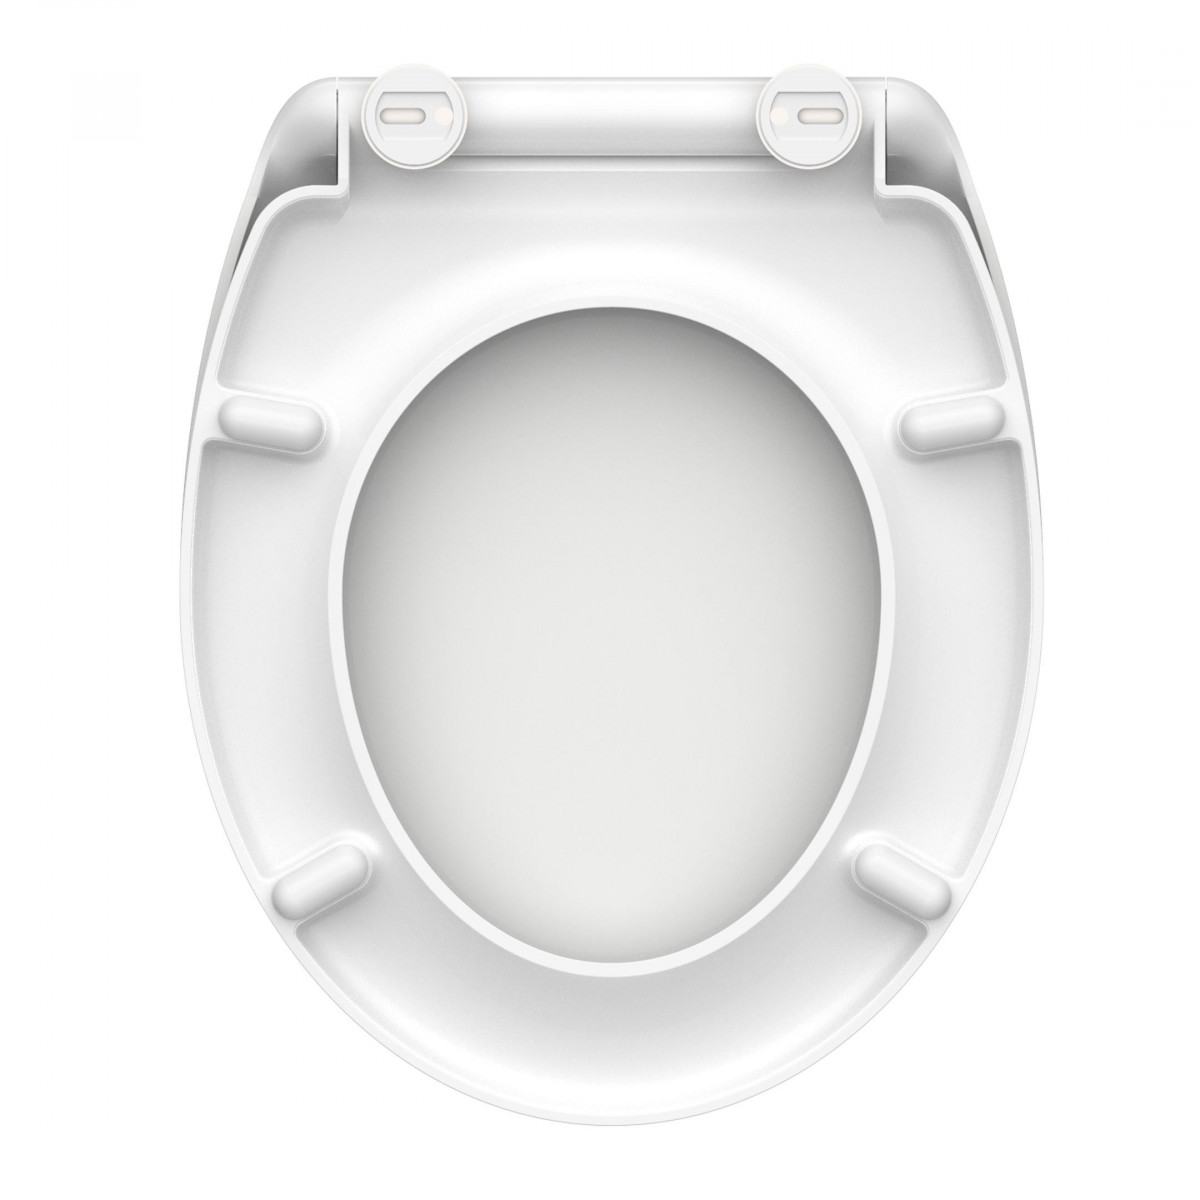 Duroplast Toilet Seat WHITE with Soft Close and Quick Release